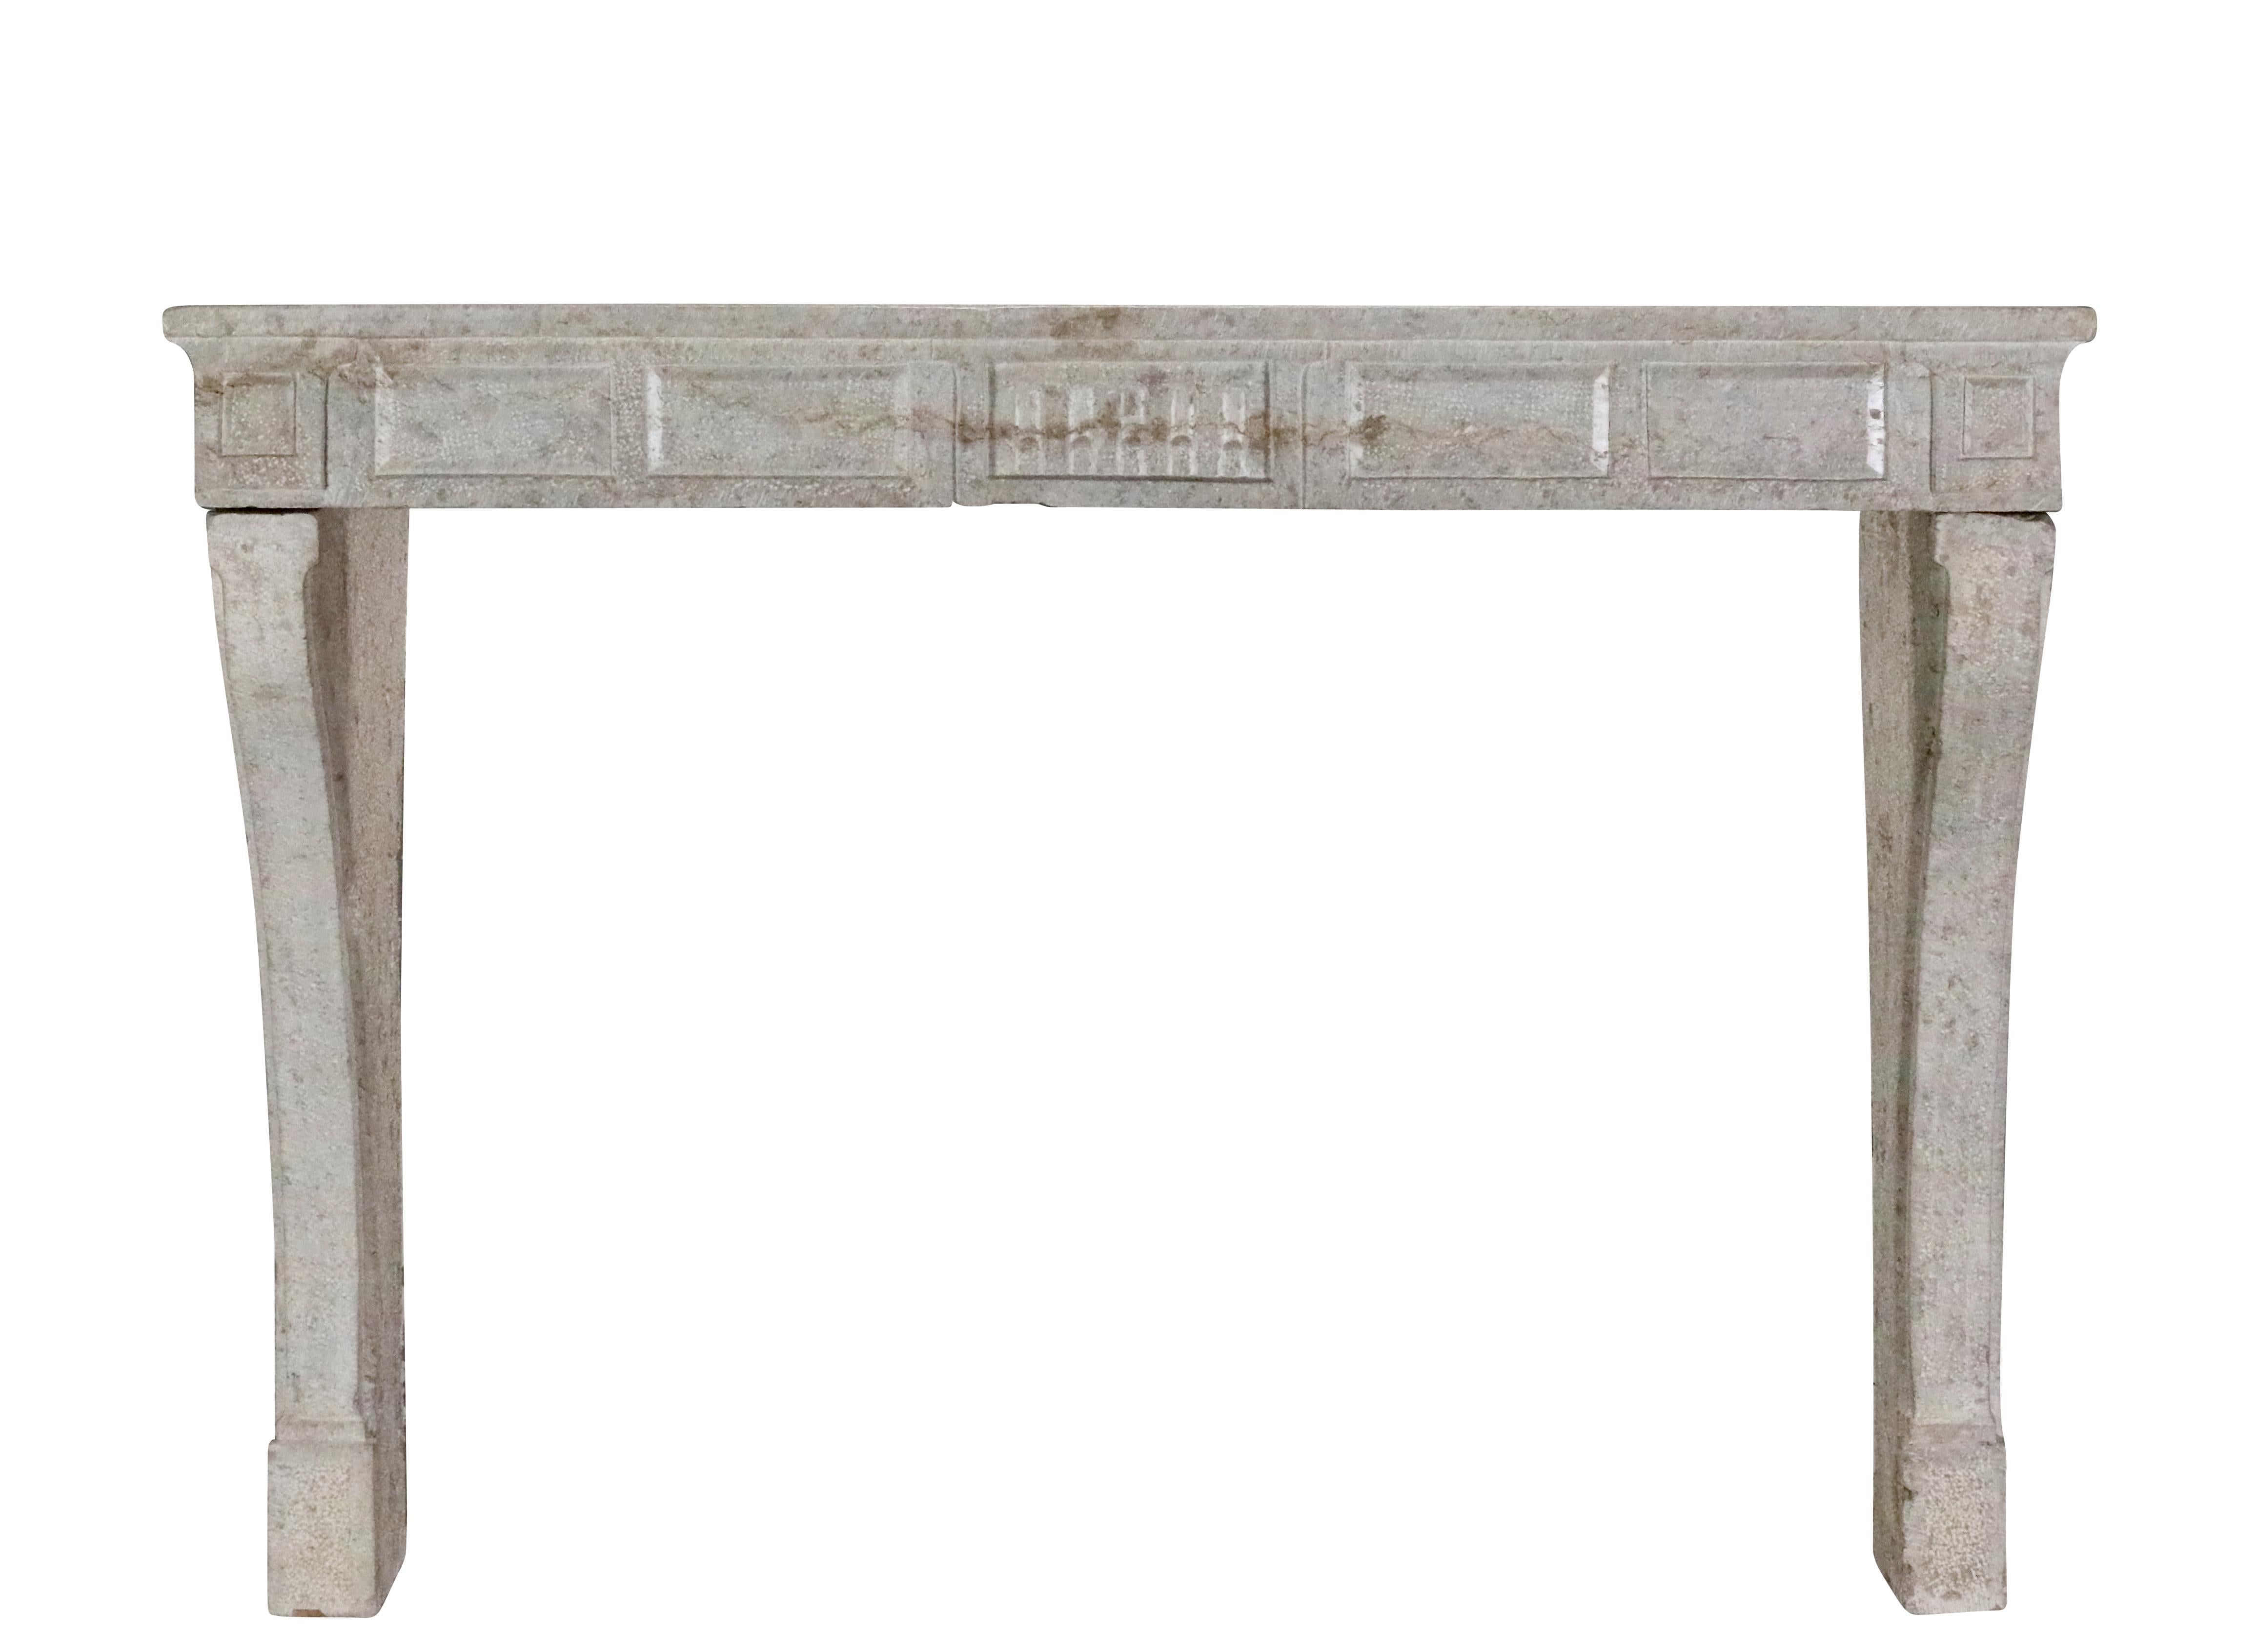 Hand-Carved Dark Beige Limestone Reclaimed French Fireplace For Modern Rustic Interior For Sale